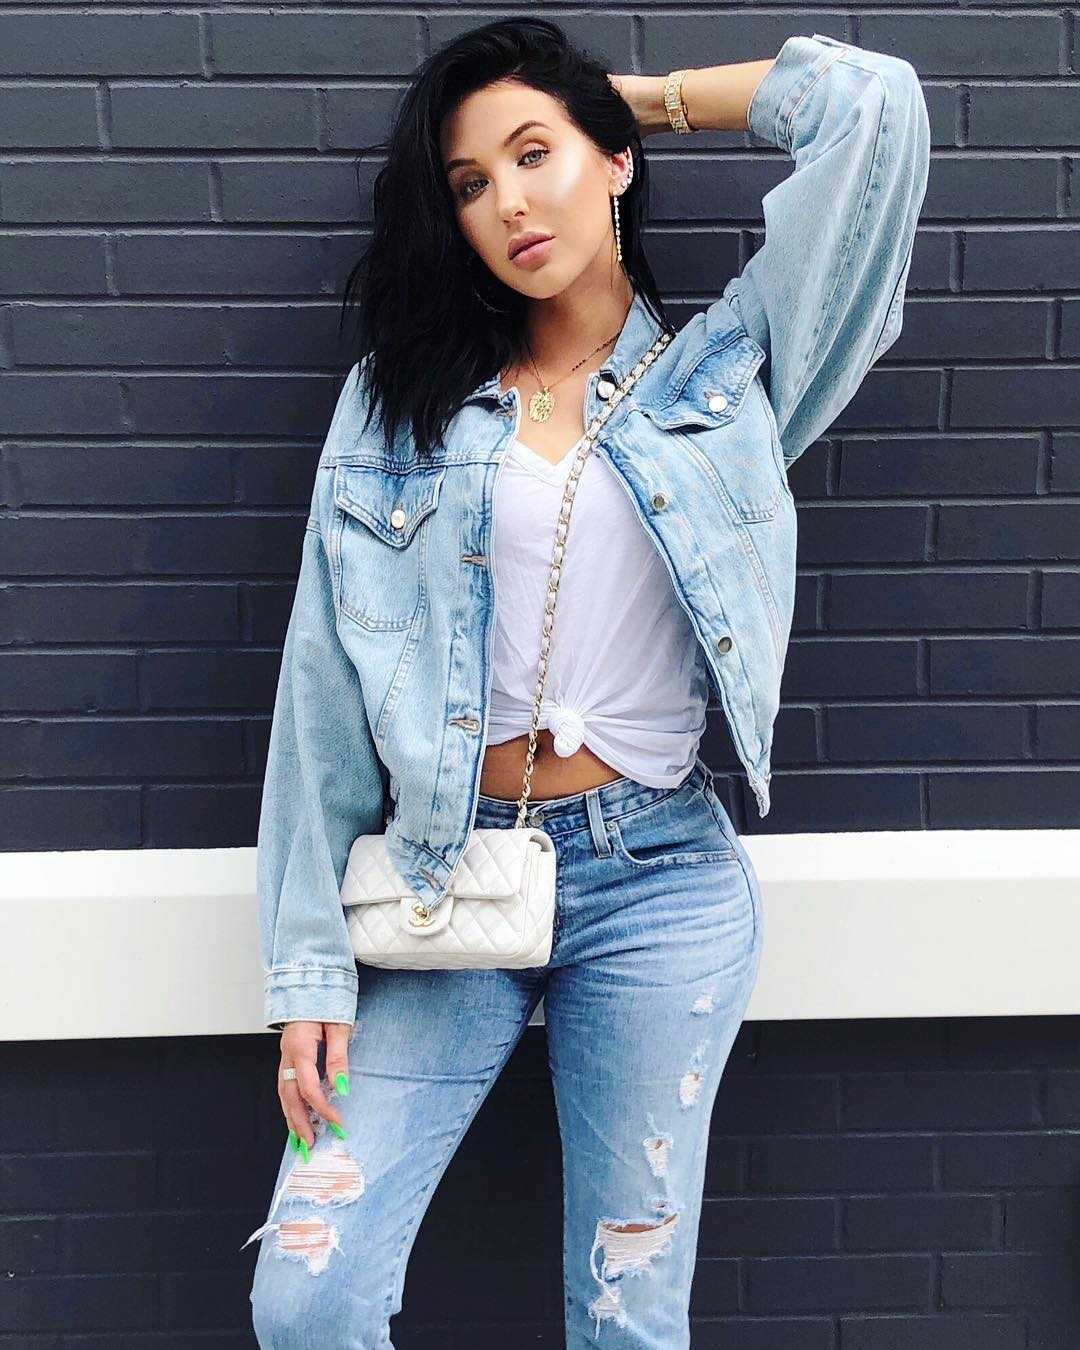 51 Sexy Jaclyn Hill Boobs Pictures Will Induce Passionate Feelings for Her 35